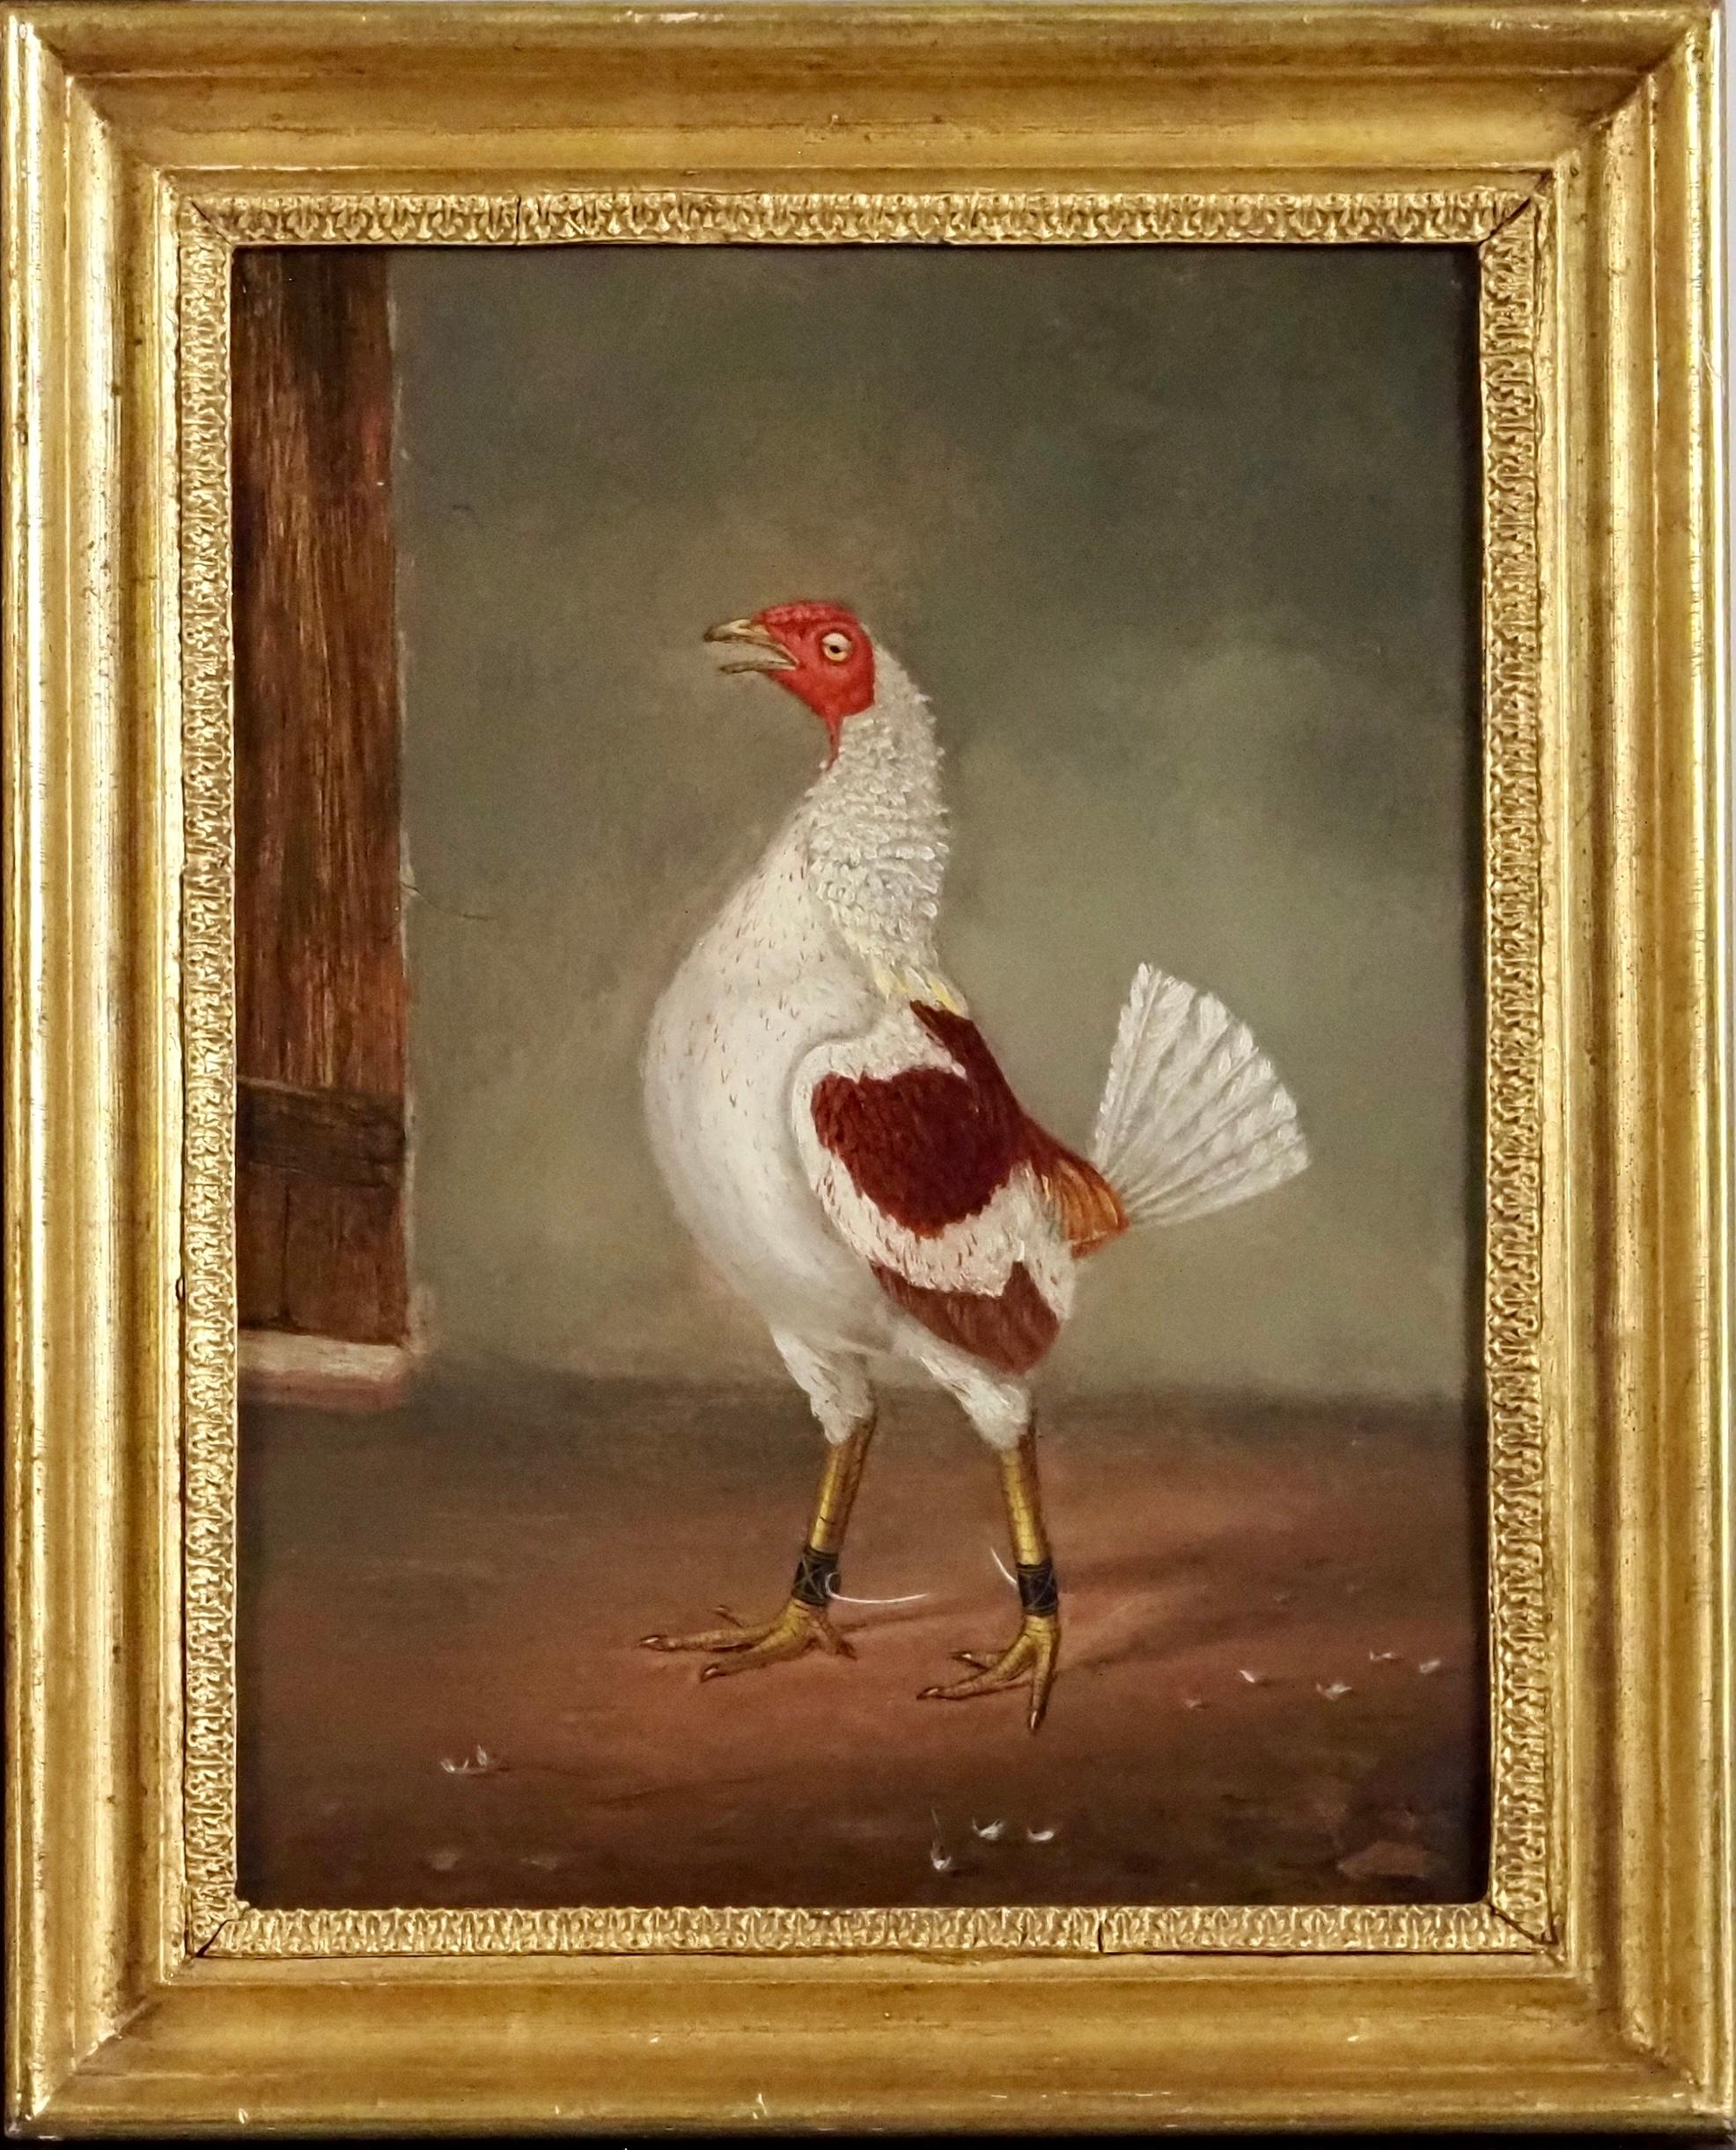 A dark-breasted fighting cock & A pale-breasted fighting cock facing - Victorian Painting by Hilton Lark Pratt